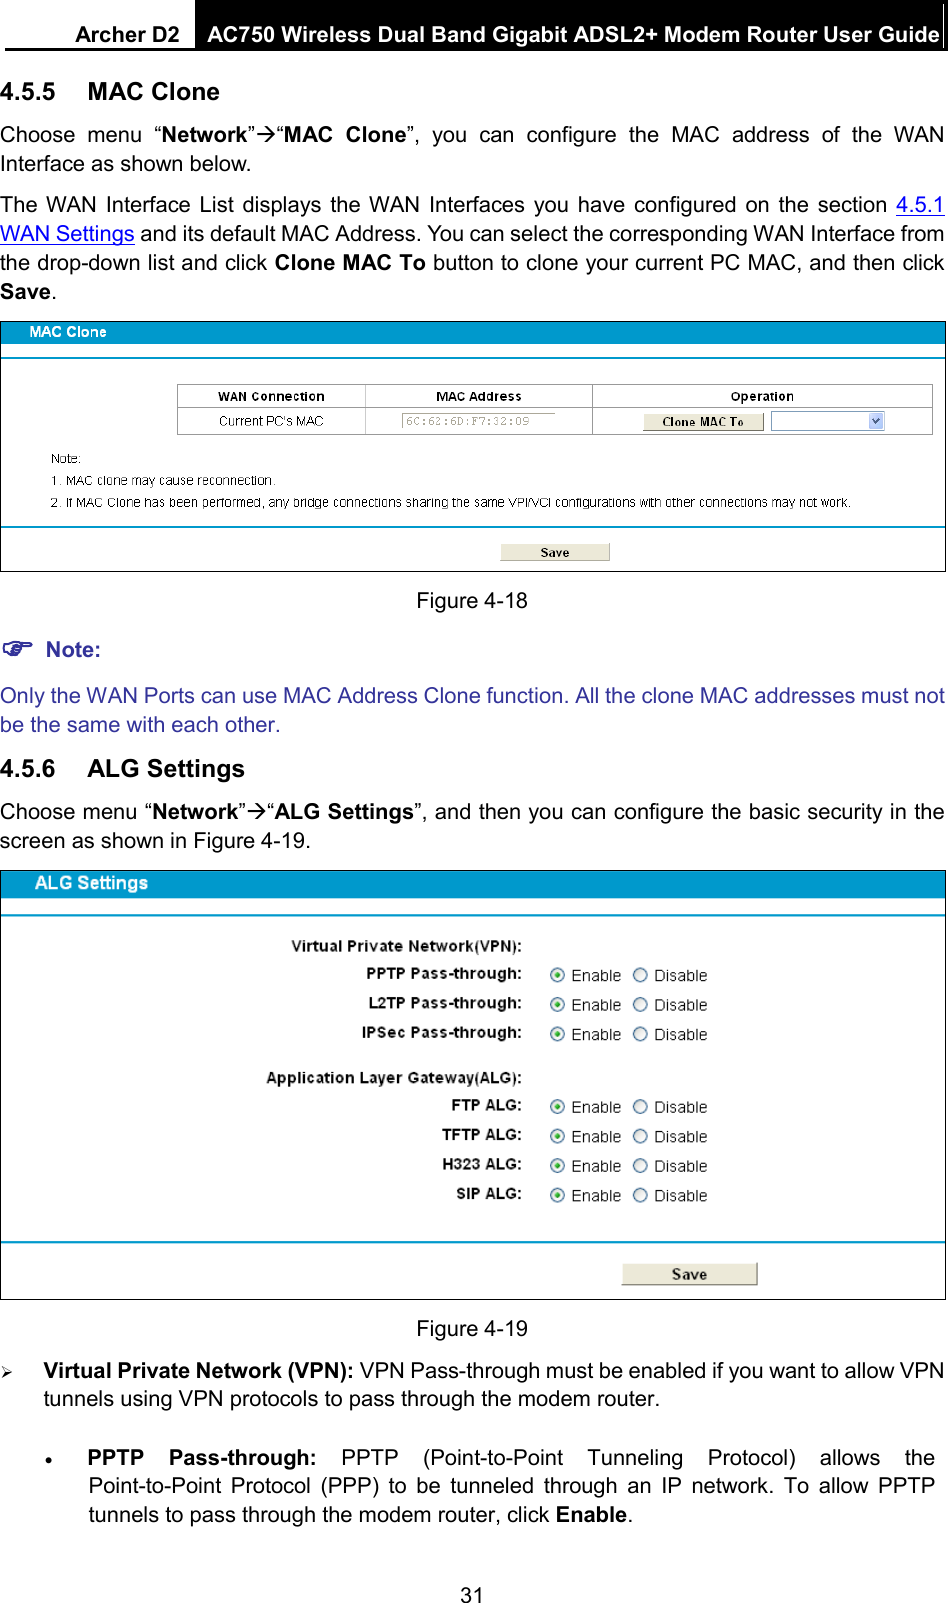 Archer D2 AC750 Wireless Dual Band Gigabit ADSL2+ Modem Router User Guide  4.5.5 MAC Clone Choose menu “Network”“MAC  Clone”, you can configure the MAC address of the  WAN Interface as shown below. The WAN Interface List displays the WAN Interfaces you have configured on the section 4.5.1 WAN Settings and its default MAC Address. You can select the corresponding WAN Interface from the drop-down list and click Clone MAC To button to clone your current PC MAC, and then click Save.  Figure 4-18  Note: Only the WAN Ports can use MAC Address Clone function. All the clone MAC addresses must not be the same with each other. 4.5.6 ALG Settings Choose menu “Network”“ALG Settings”, and then you can configure the basic security in the screen as shown in Figure 4-19.  Figure 4-19  Virtual Private Network (VPN): VPN Pass-through must be enabled if you want to allow VPN tunnels using VPN protocols to pass through the modem router. • PPTP Pass-through: PPTP  (Point-to-Point Tunneling Protocol) allows the Point-to-Point Protocol (PPP) to be tunneled through an IP network. To allow PPTP tunnels to pass through the modem router, click Enable. 31 